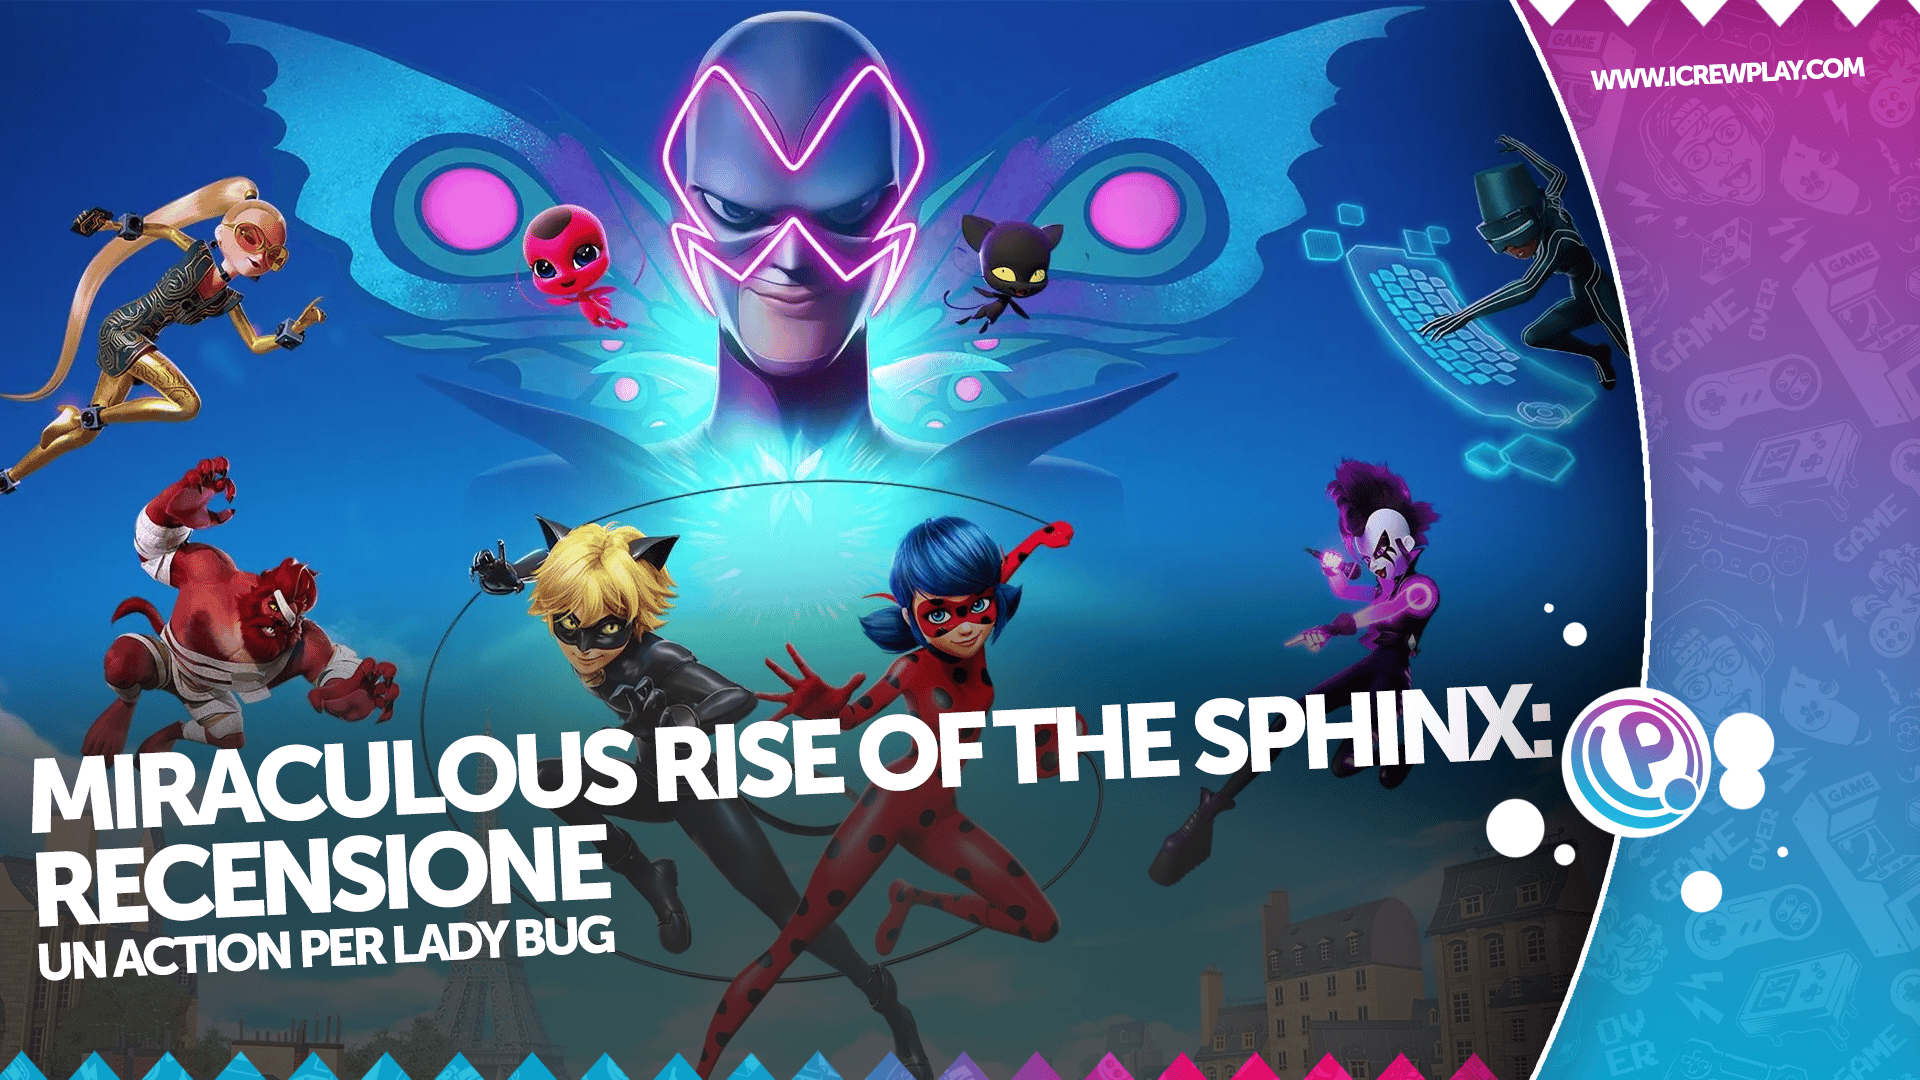 Miraculous rise of the sphinx: recensione per PlayStation 4 18